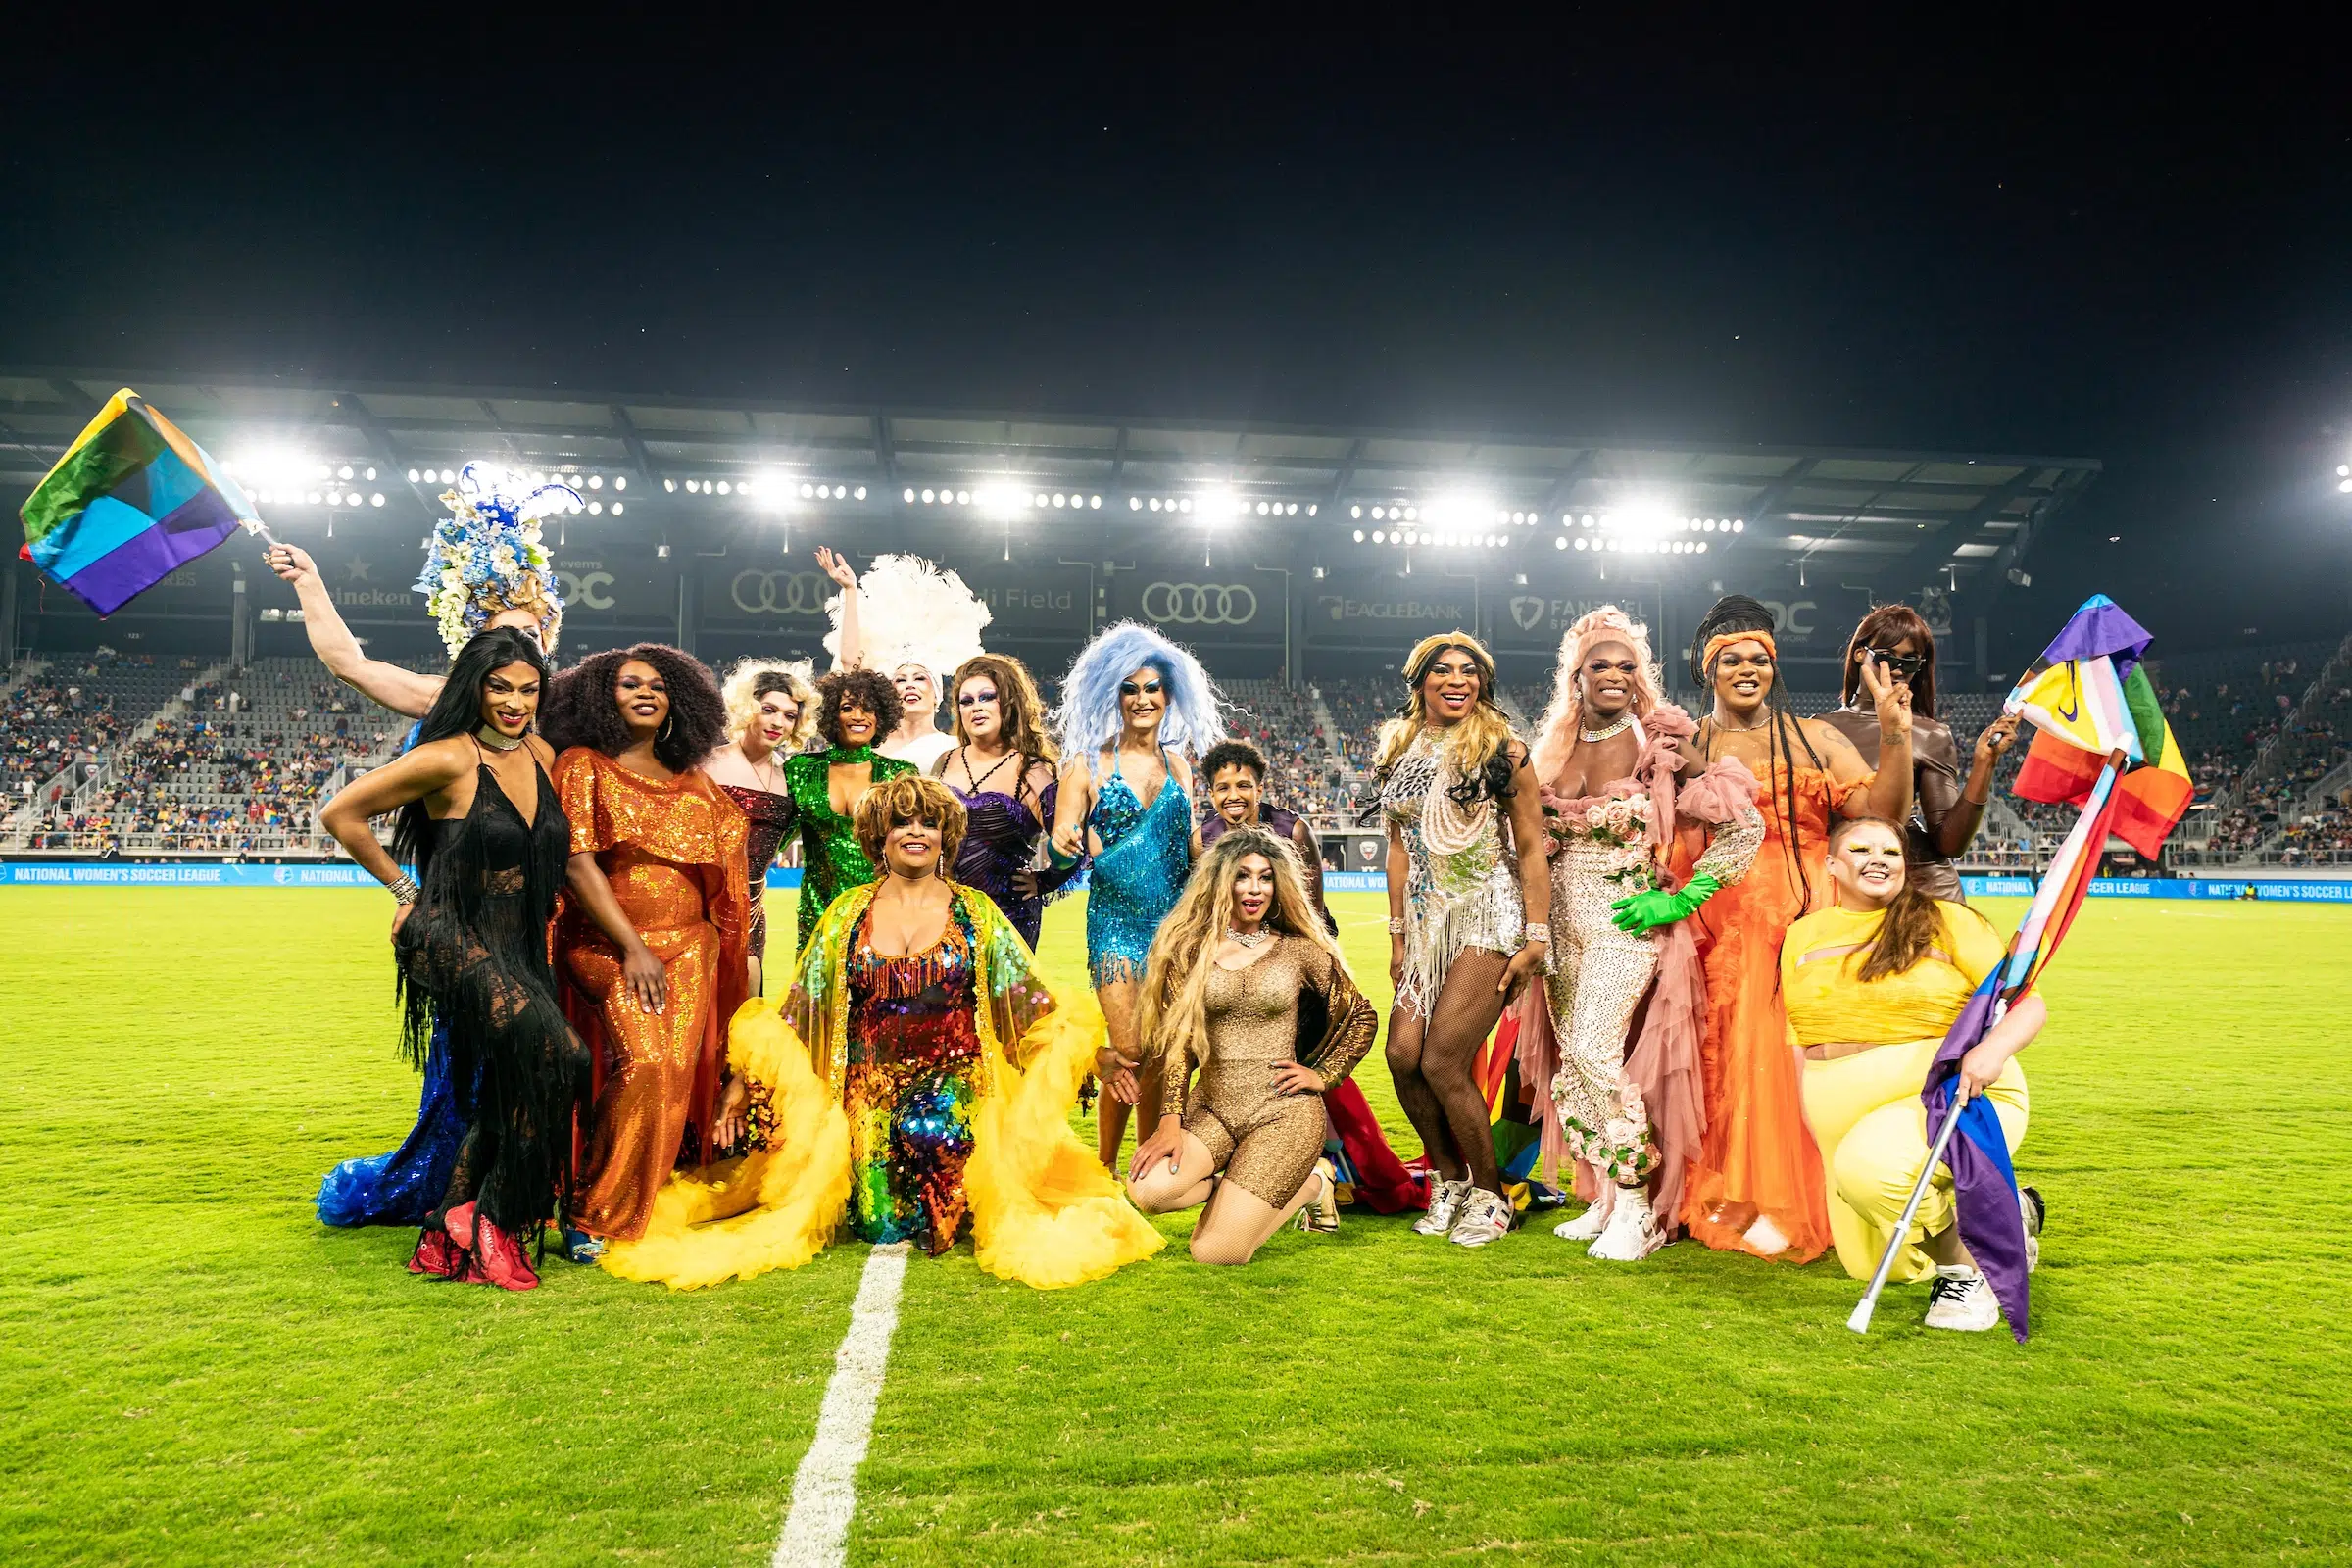 More than a dozen drag queens wearing a variety of colors, sequins, and glitter pose for photo at midfield.